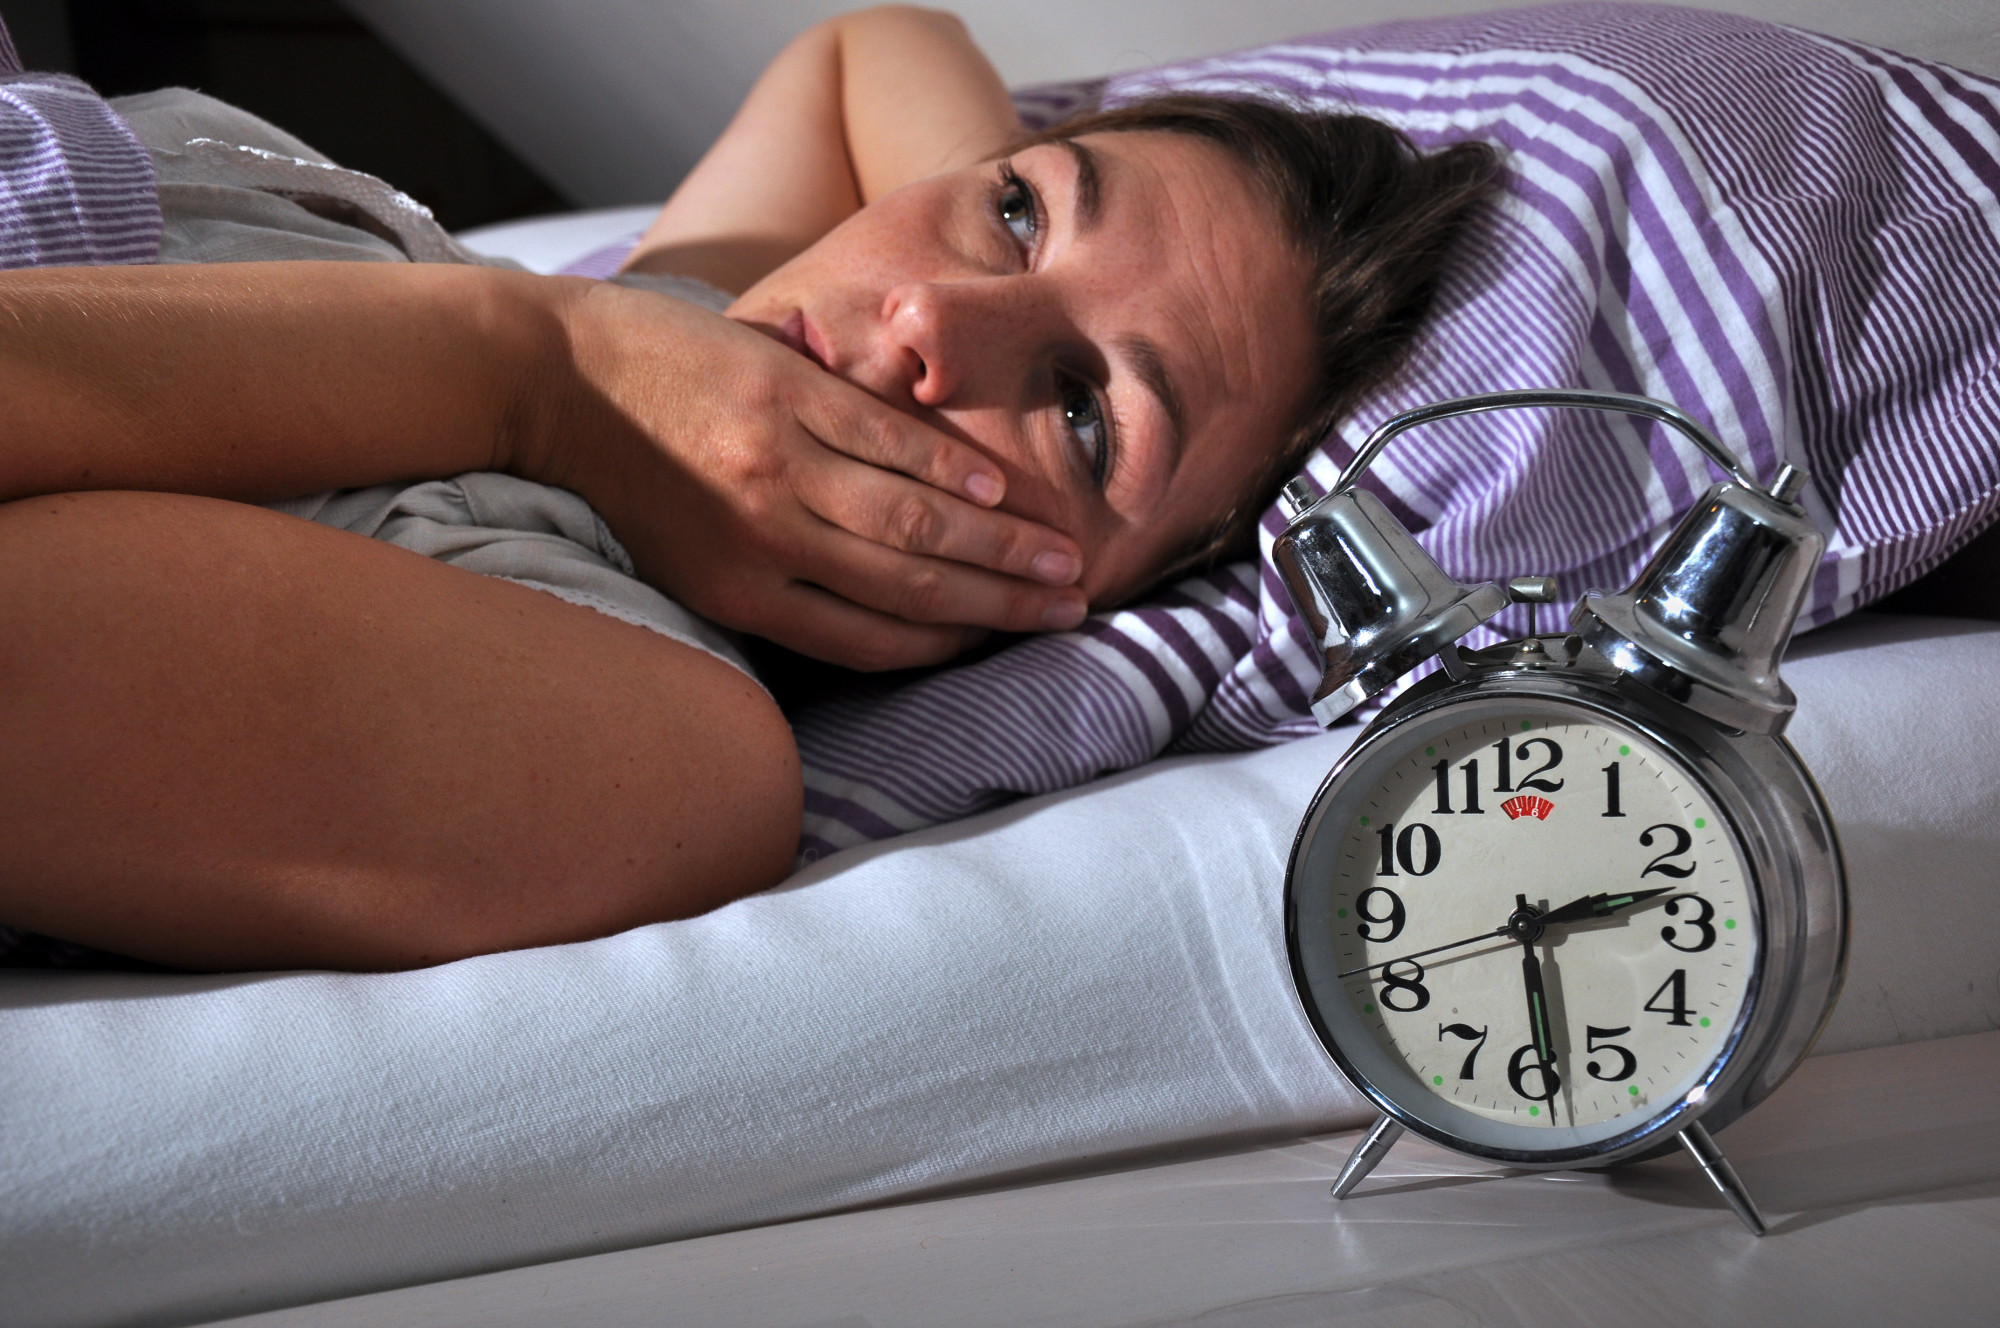 Why Can't I Fall Asleep? 5 Causes and Fixes for Insomnia